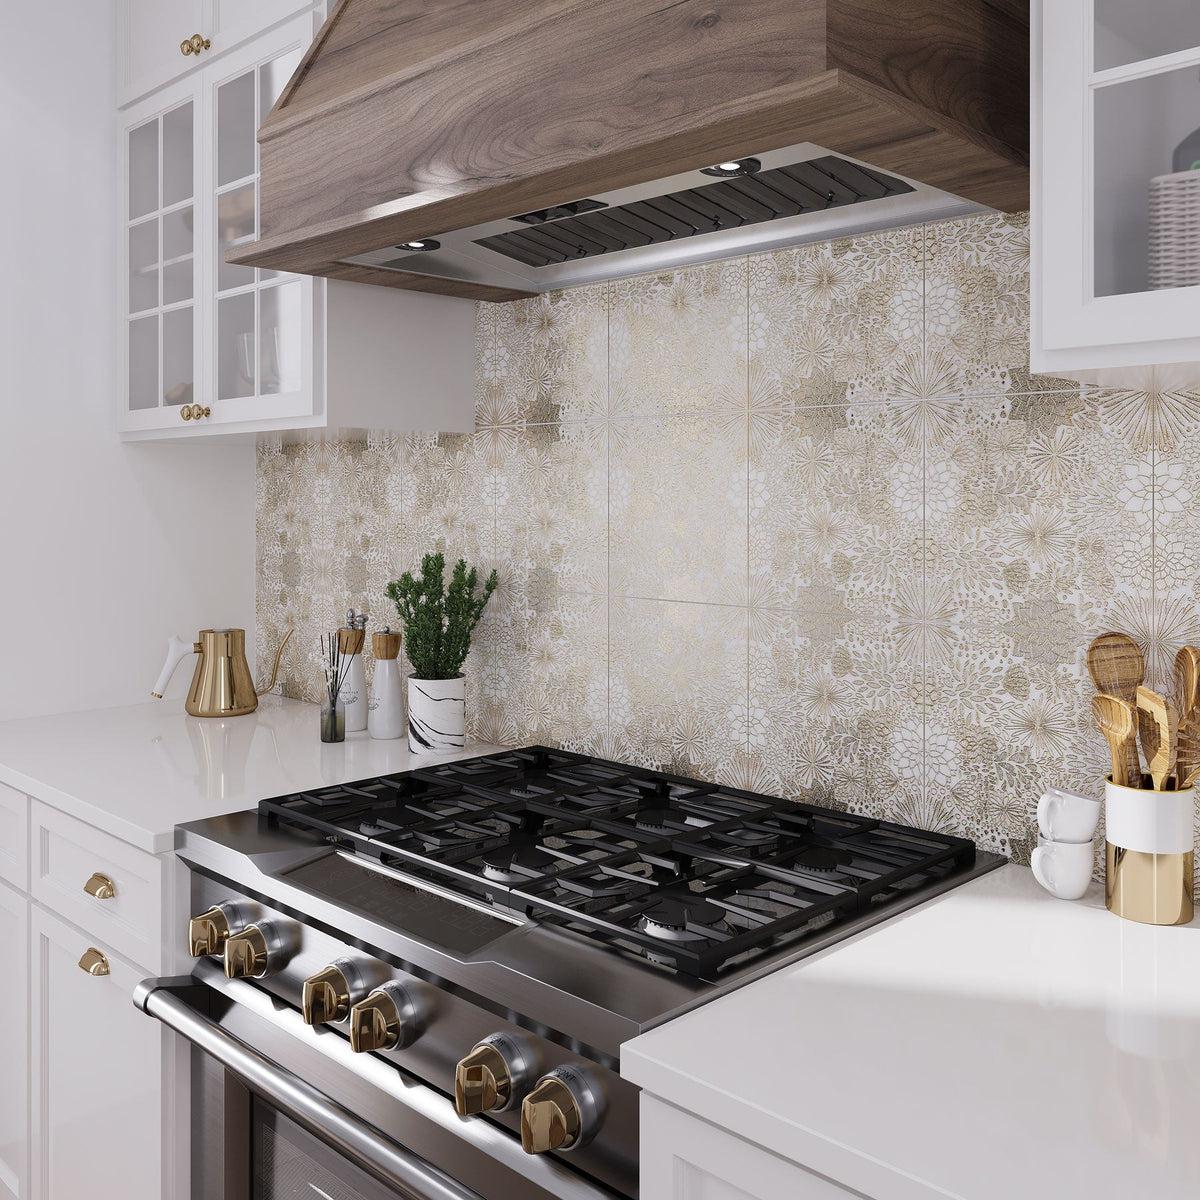 White and gold tile behind kitchen stove with floral pattern